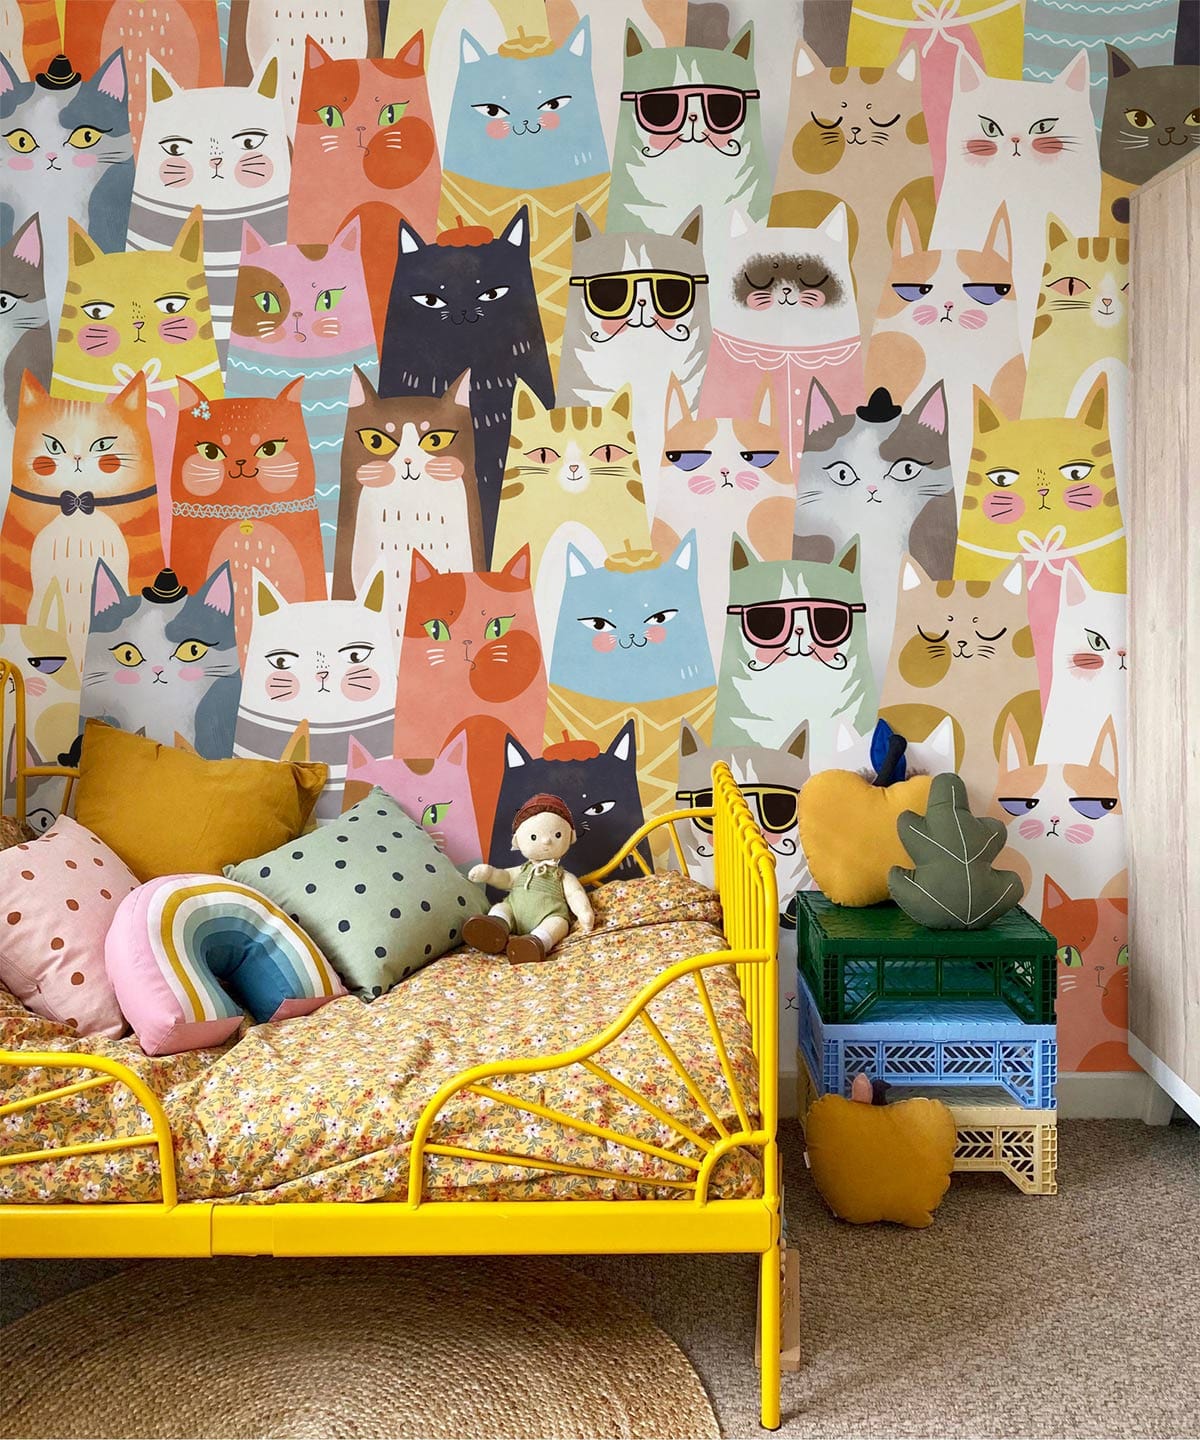 Wall Decals for Children's Rooms Depicting Cartoon Kittens in a Variety of Colors and Expressions